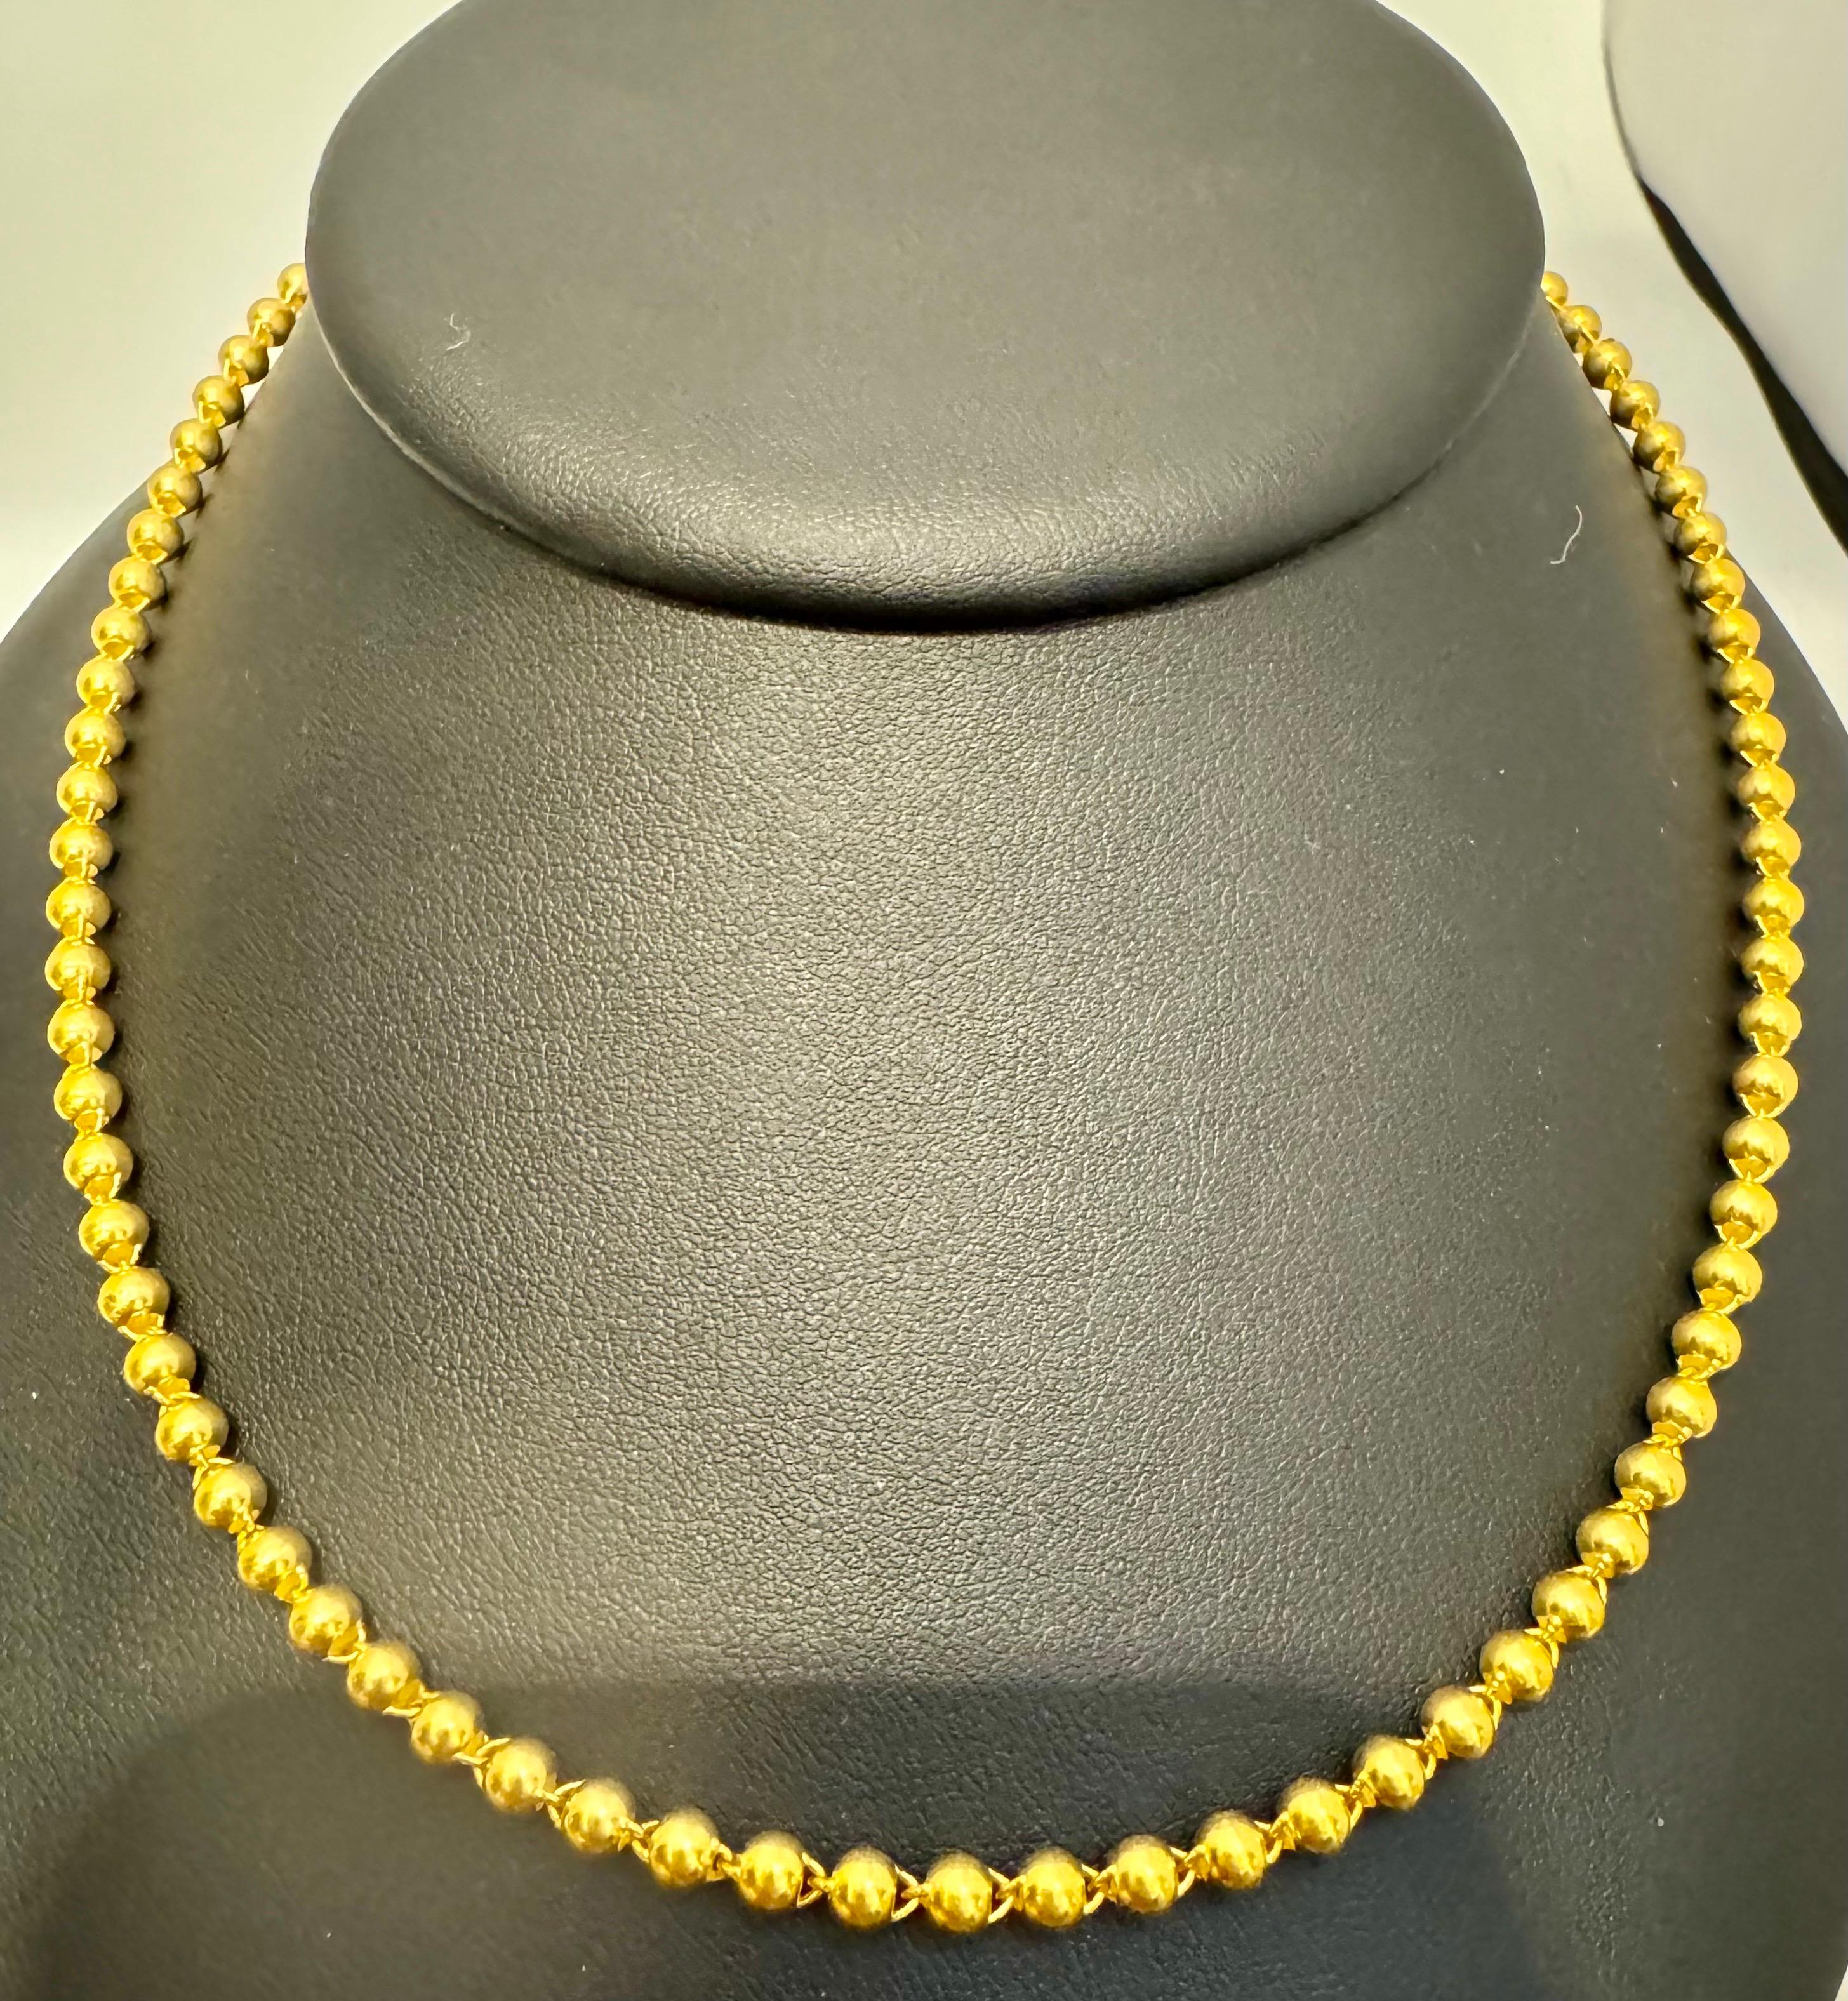 Vintage 19 Gm Pure 24 Karat Yellow Gold Handmade Ball Chain 17 inch long
 pure gold
4.14 mm wide 
Hand Made in Thailand
24 karat s clasp
Chain is 17 inch long s
Simple ball Design
Please look at all the pictures
Its very hard to capture the true